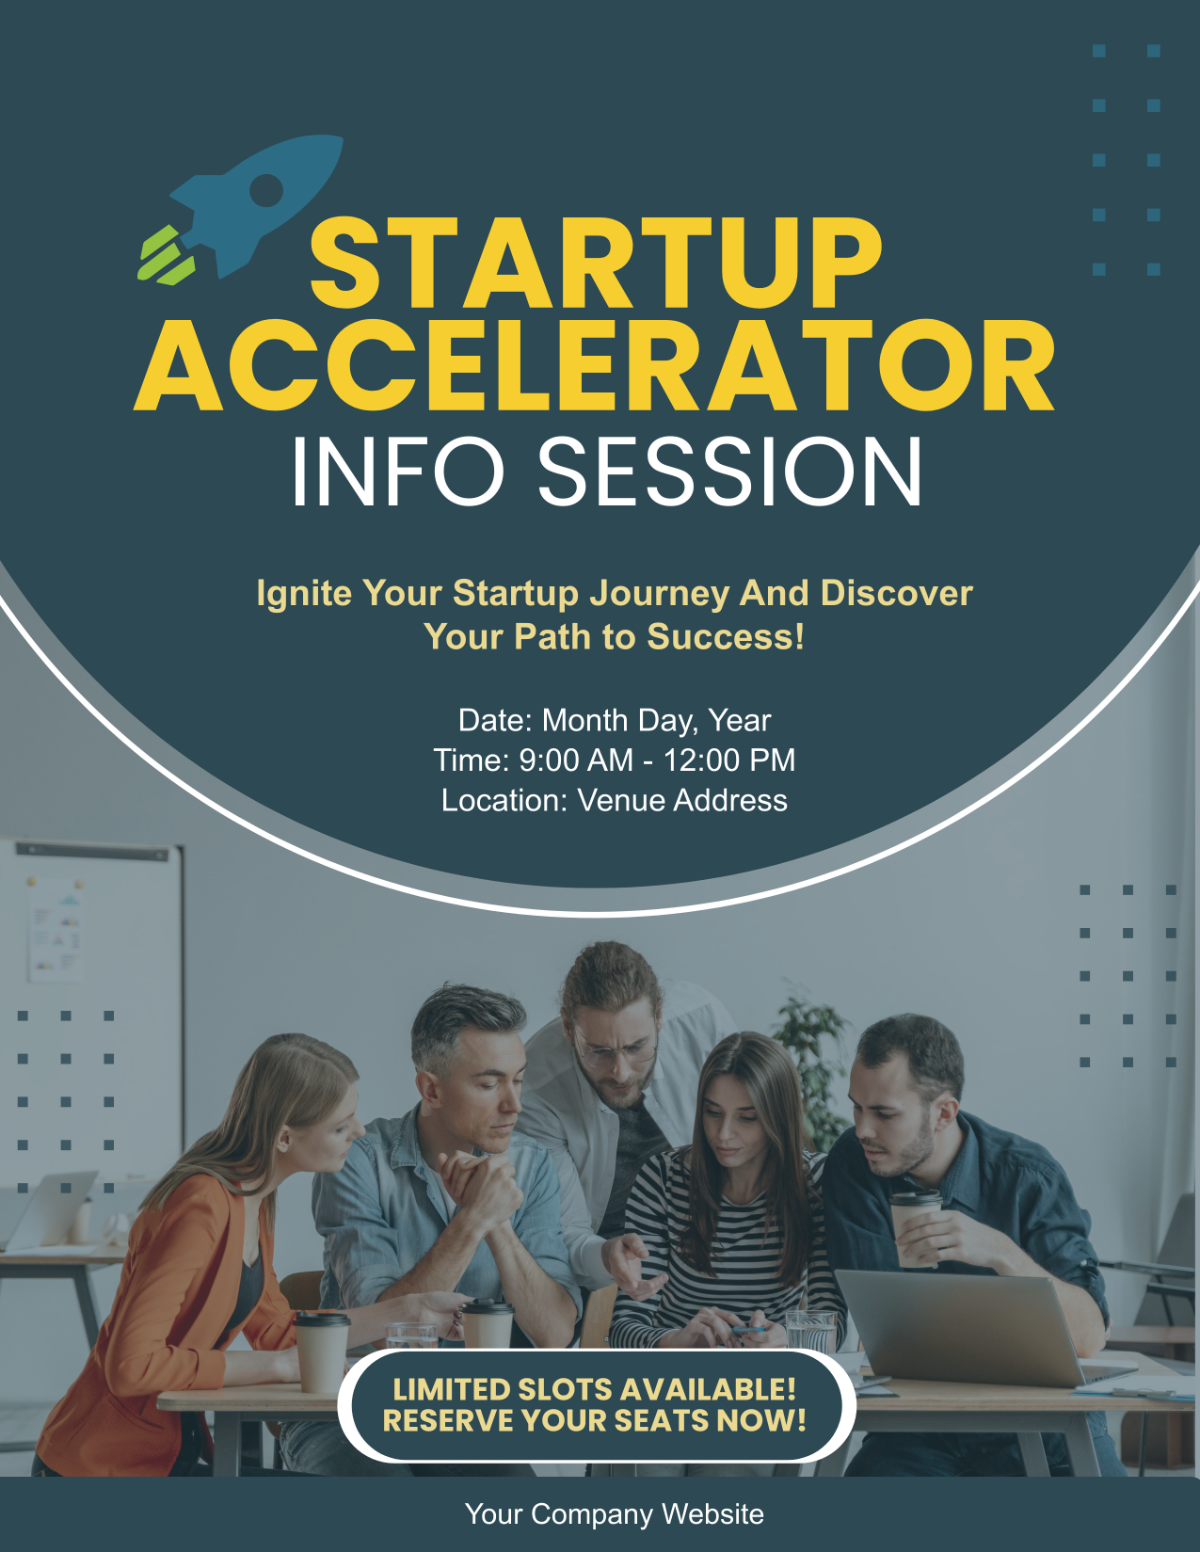 Startup Accelerator Info Session Flyer Template